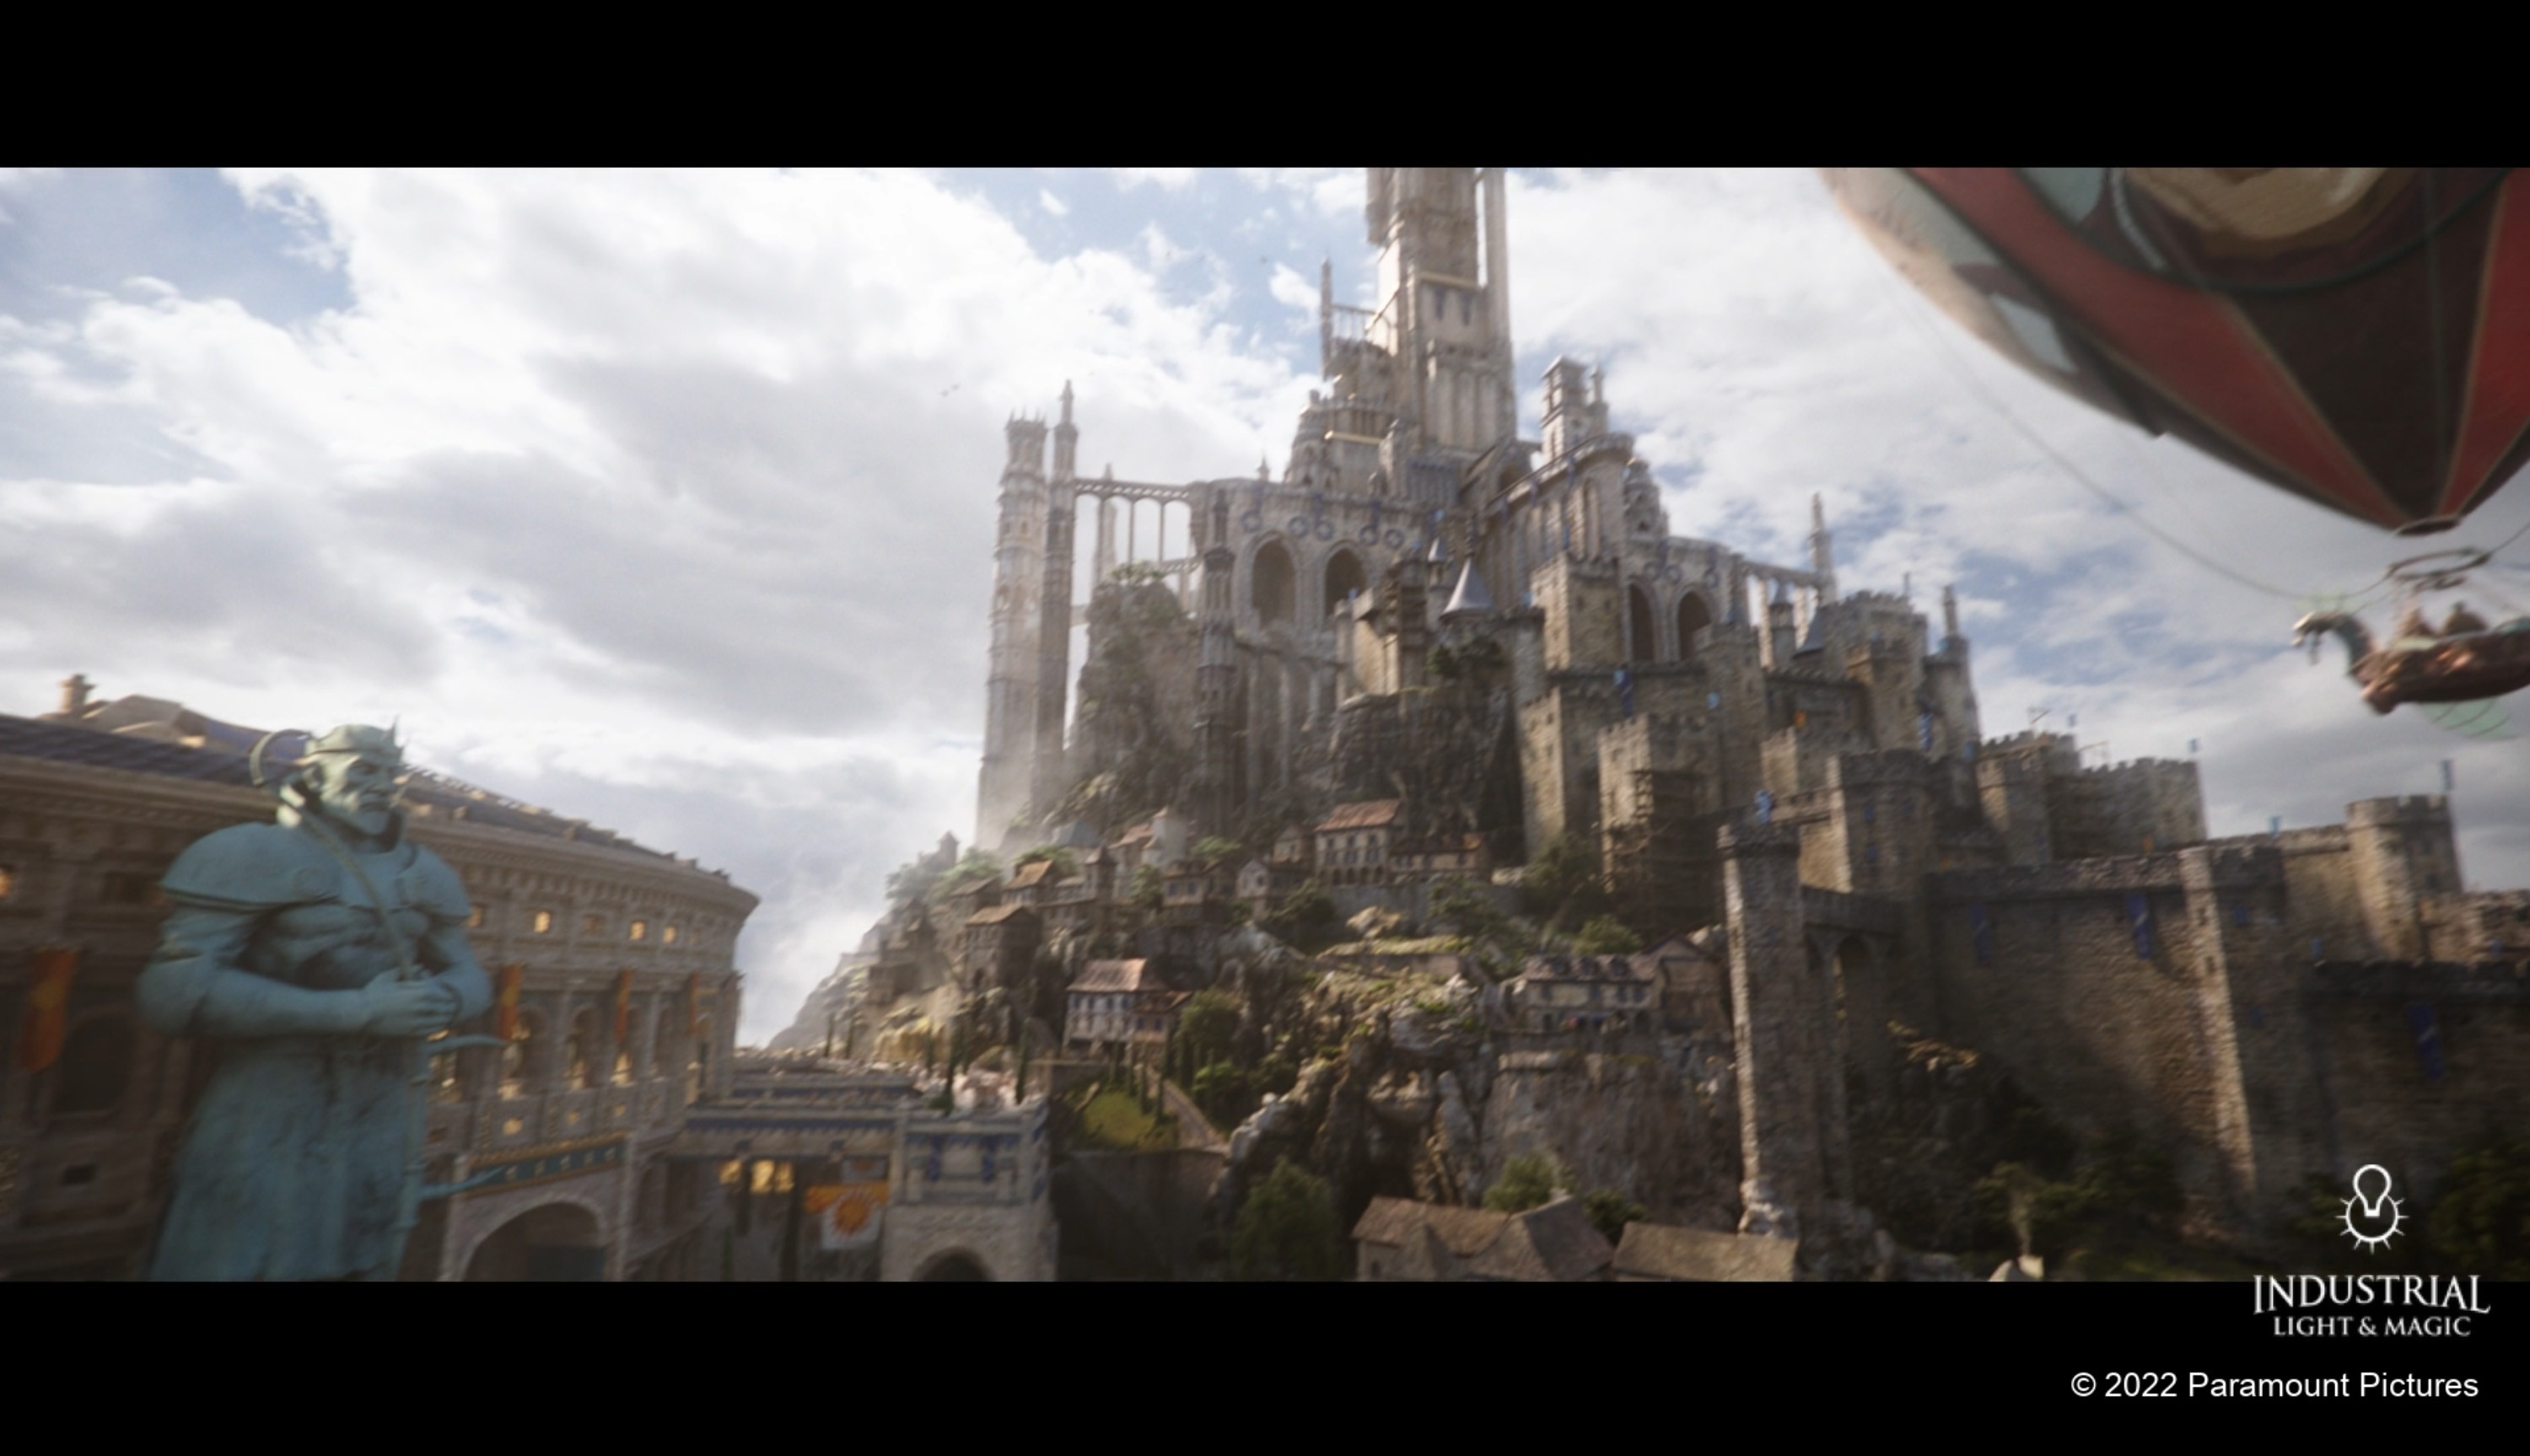 full cg shot, layout, design, texturing and vegetation of the slopes section around the castle 